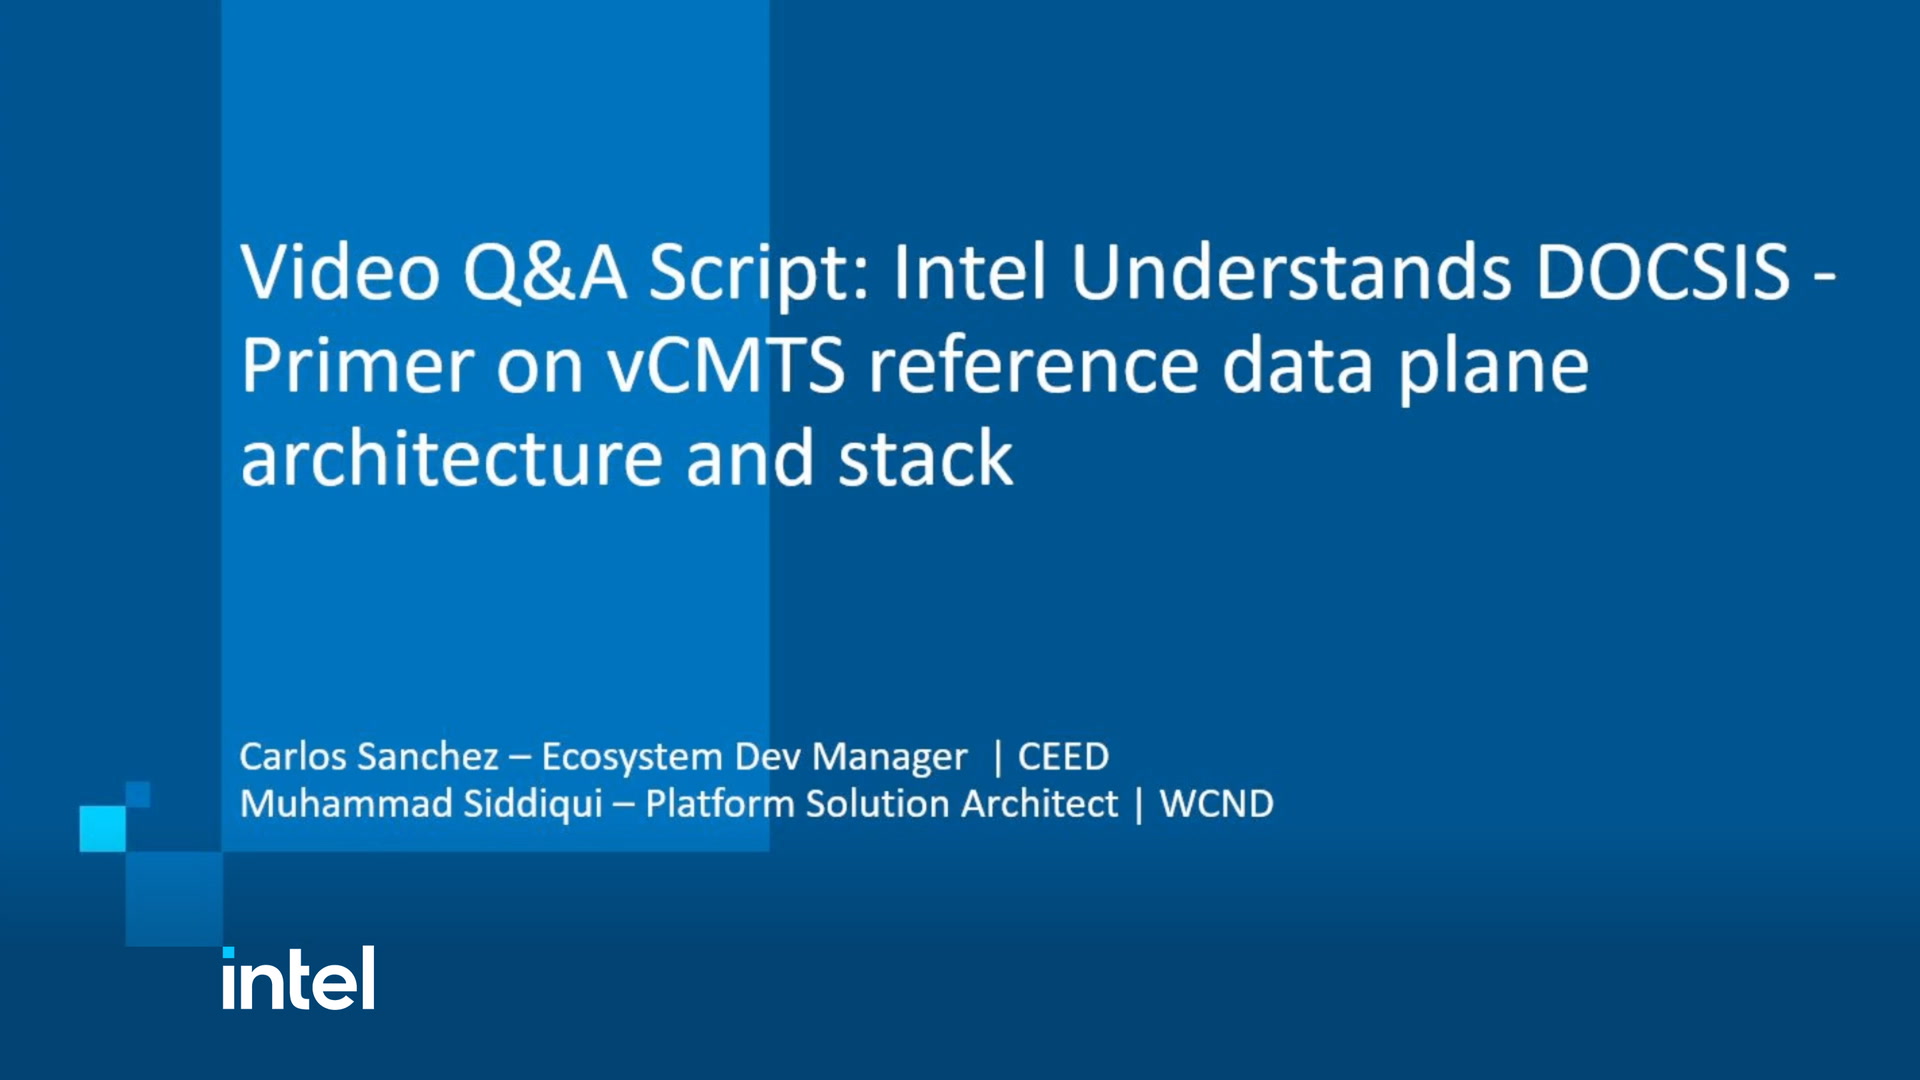 Intel Knows DOCSIS : Primer on Intel’s vCMTS Reference Data Plane